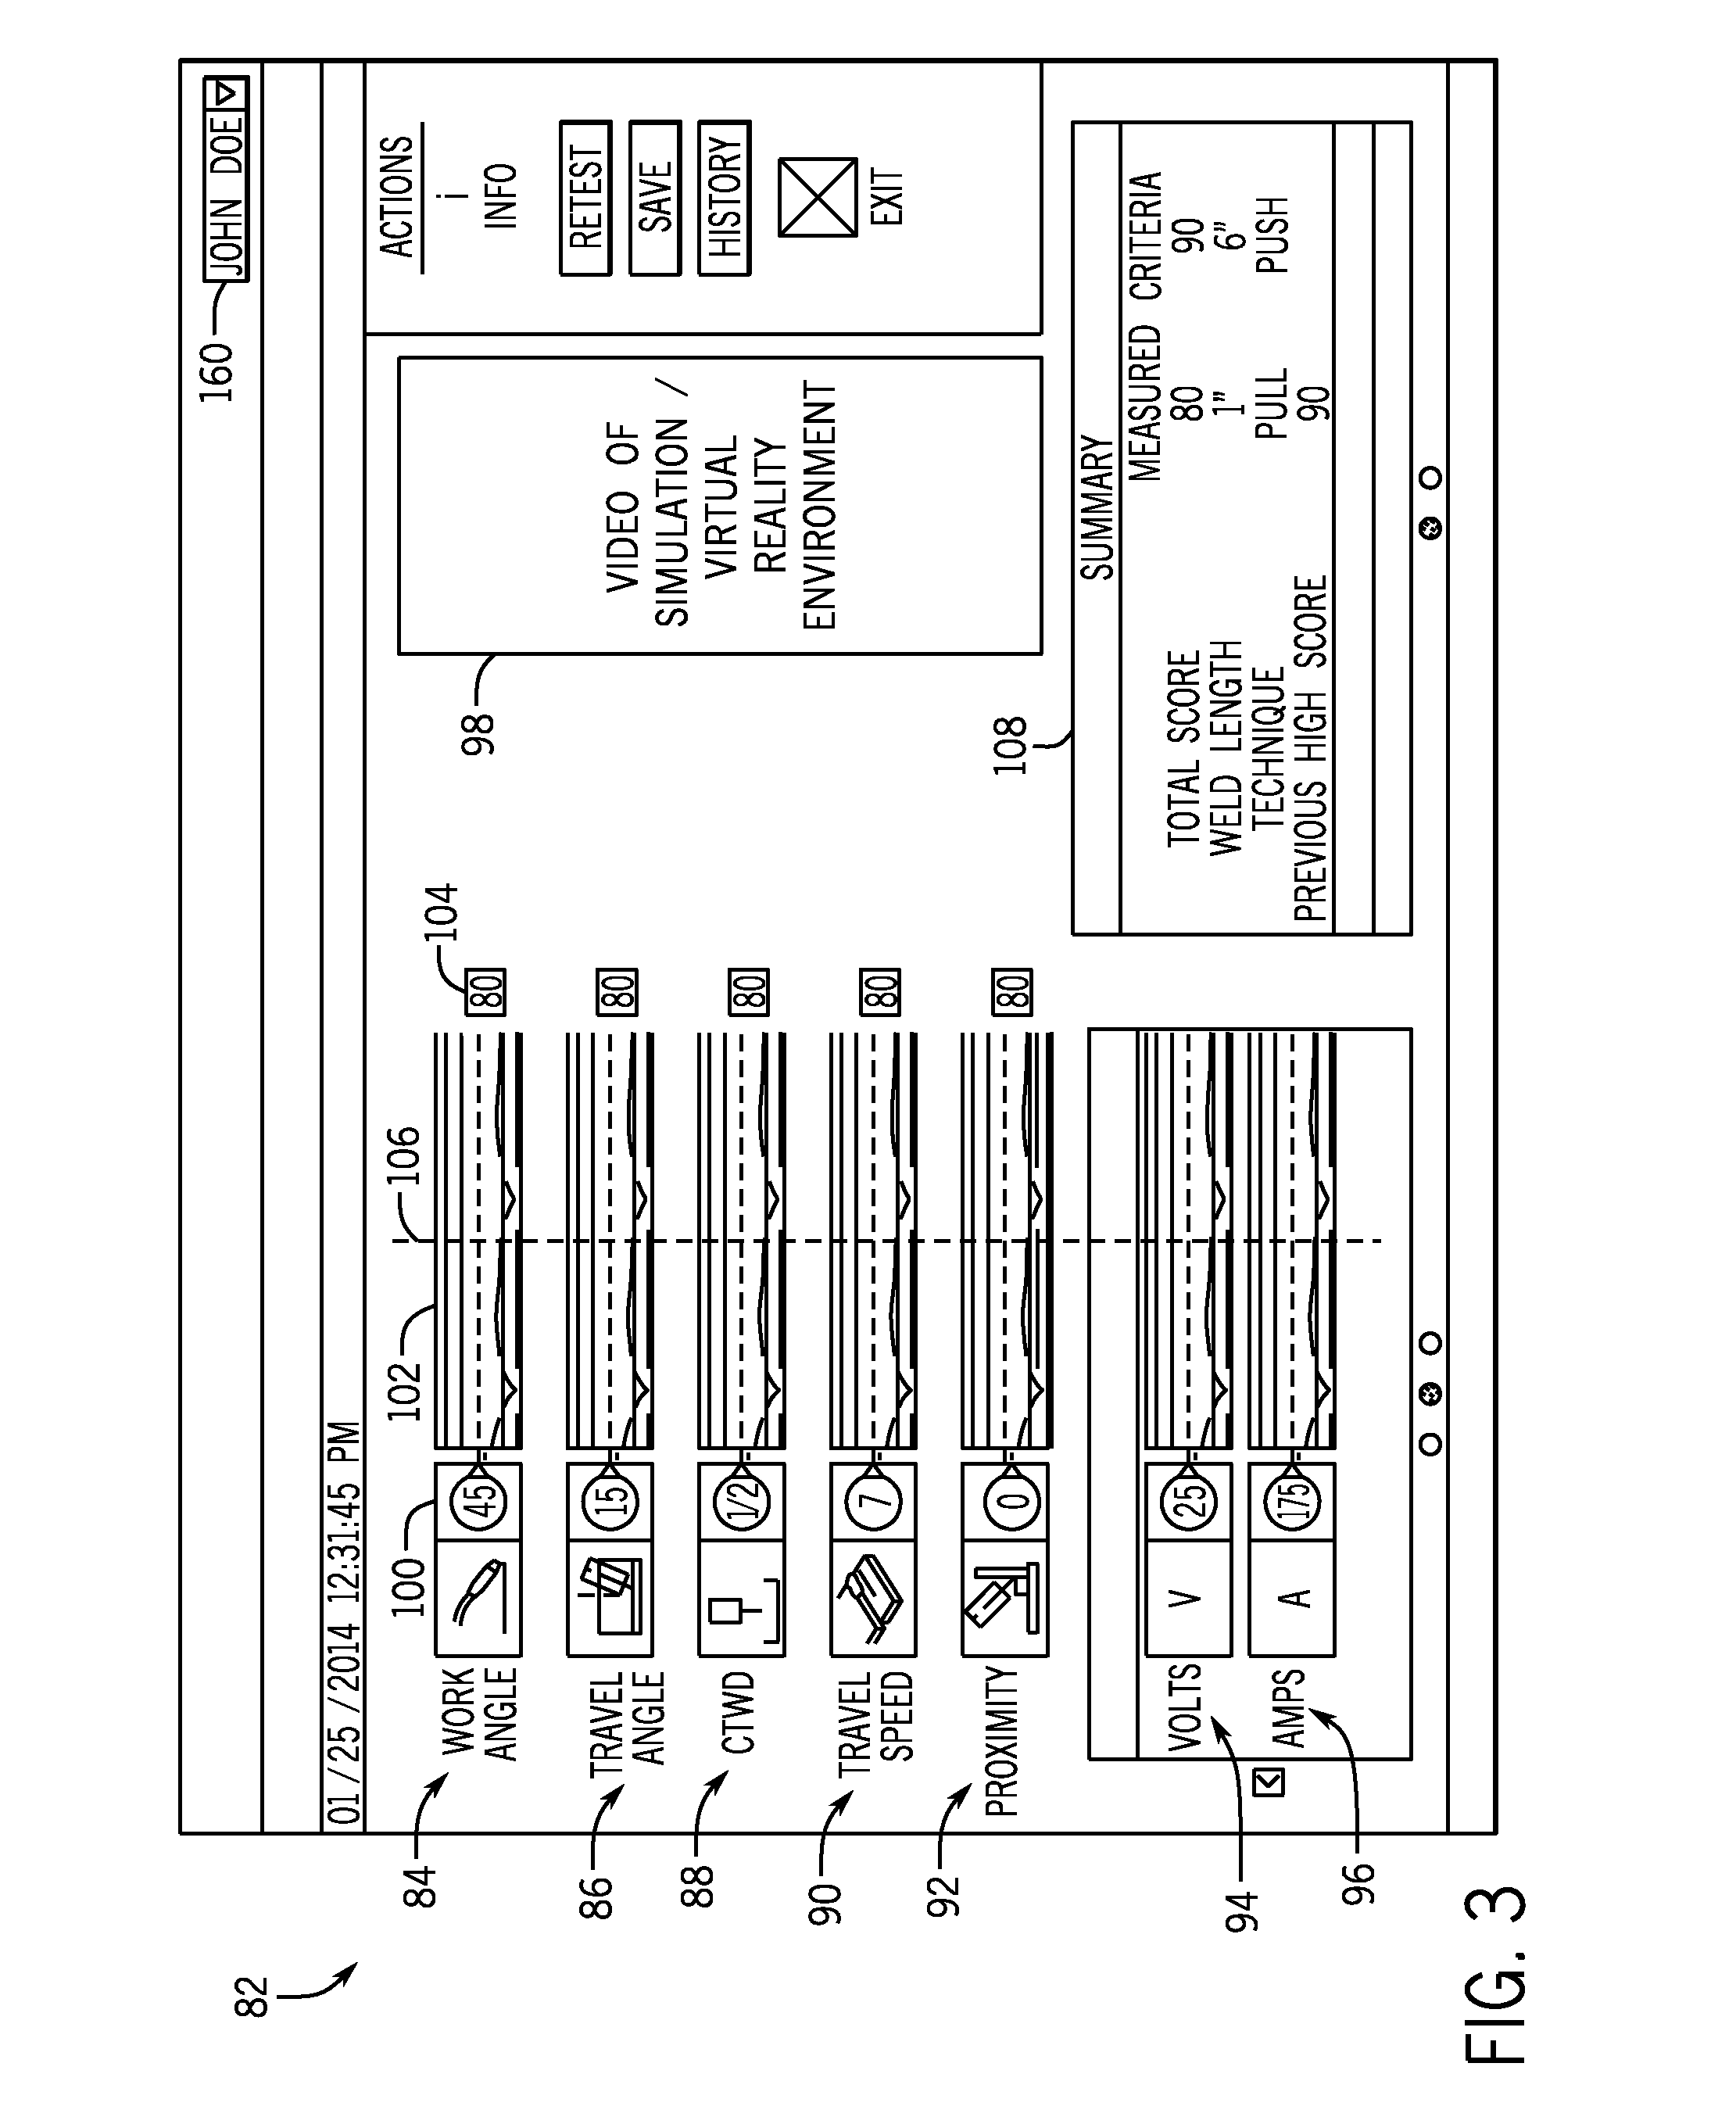 Weld training system and method